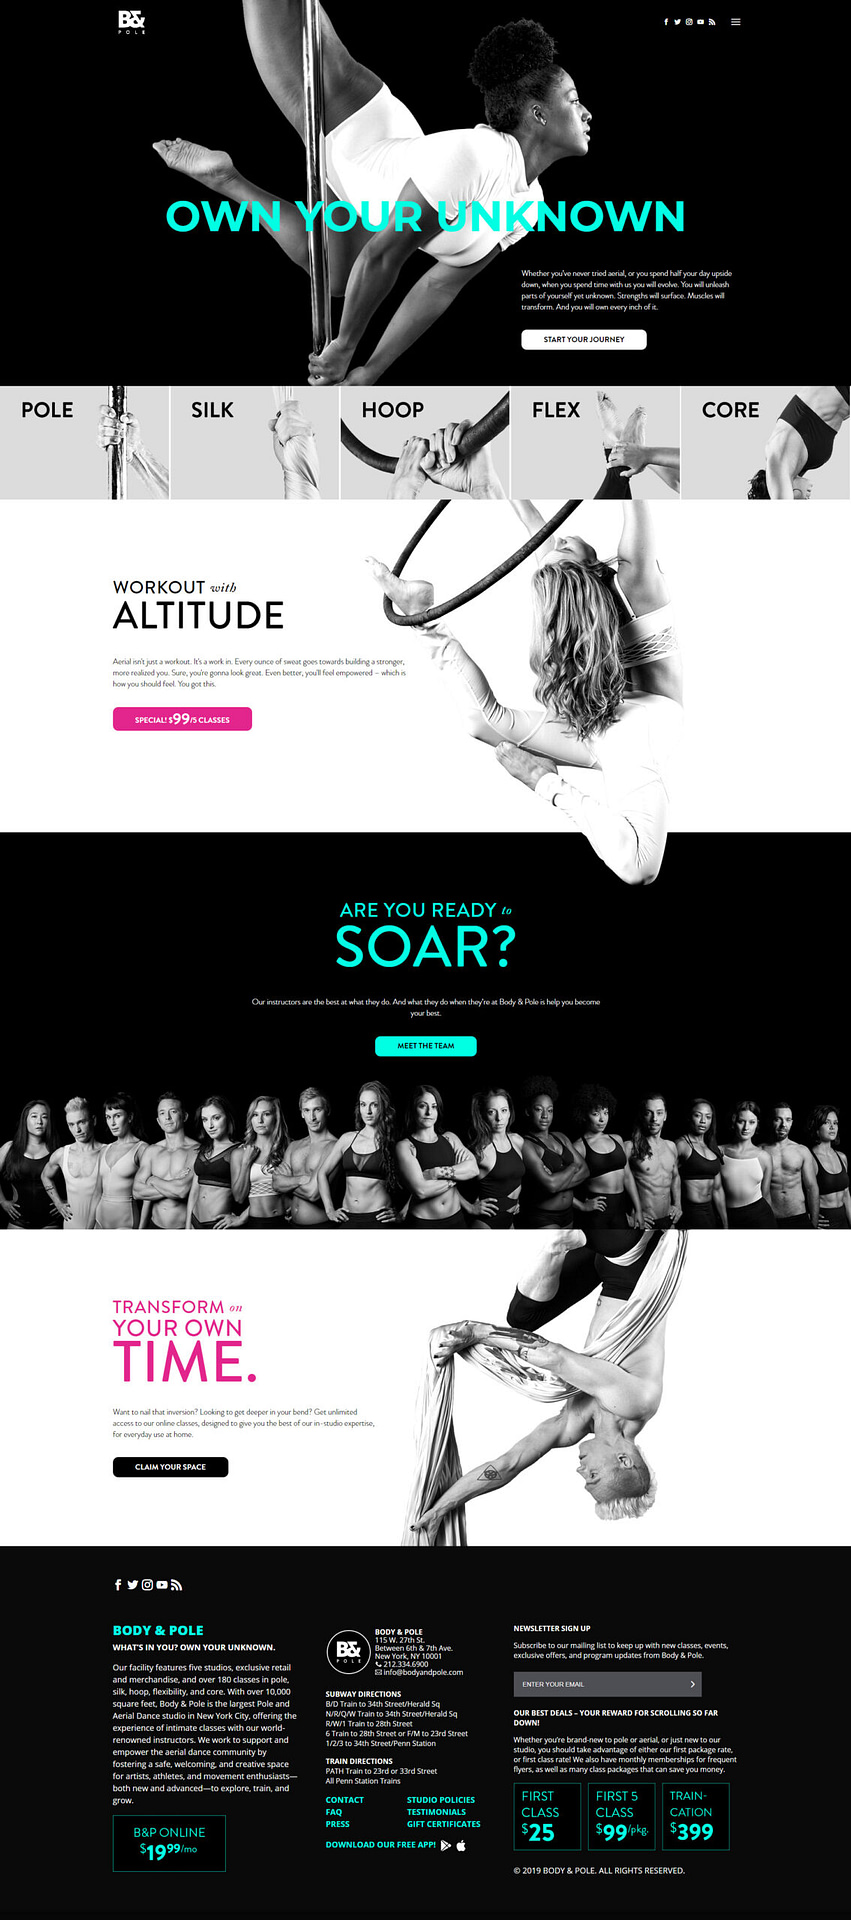 Body and Pole Homepage by NB Technologies